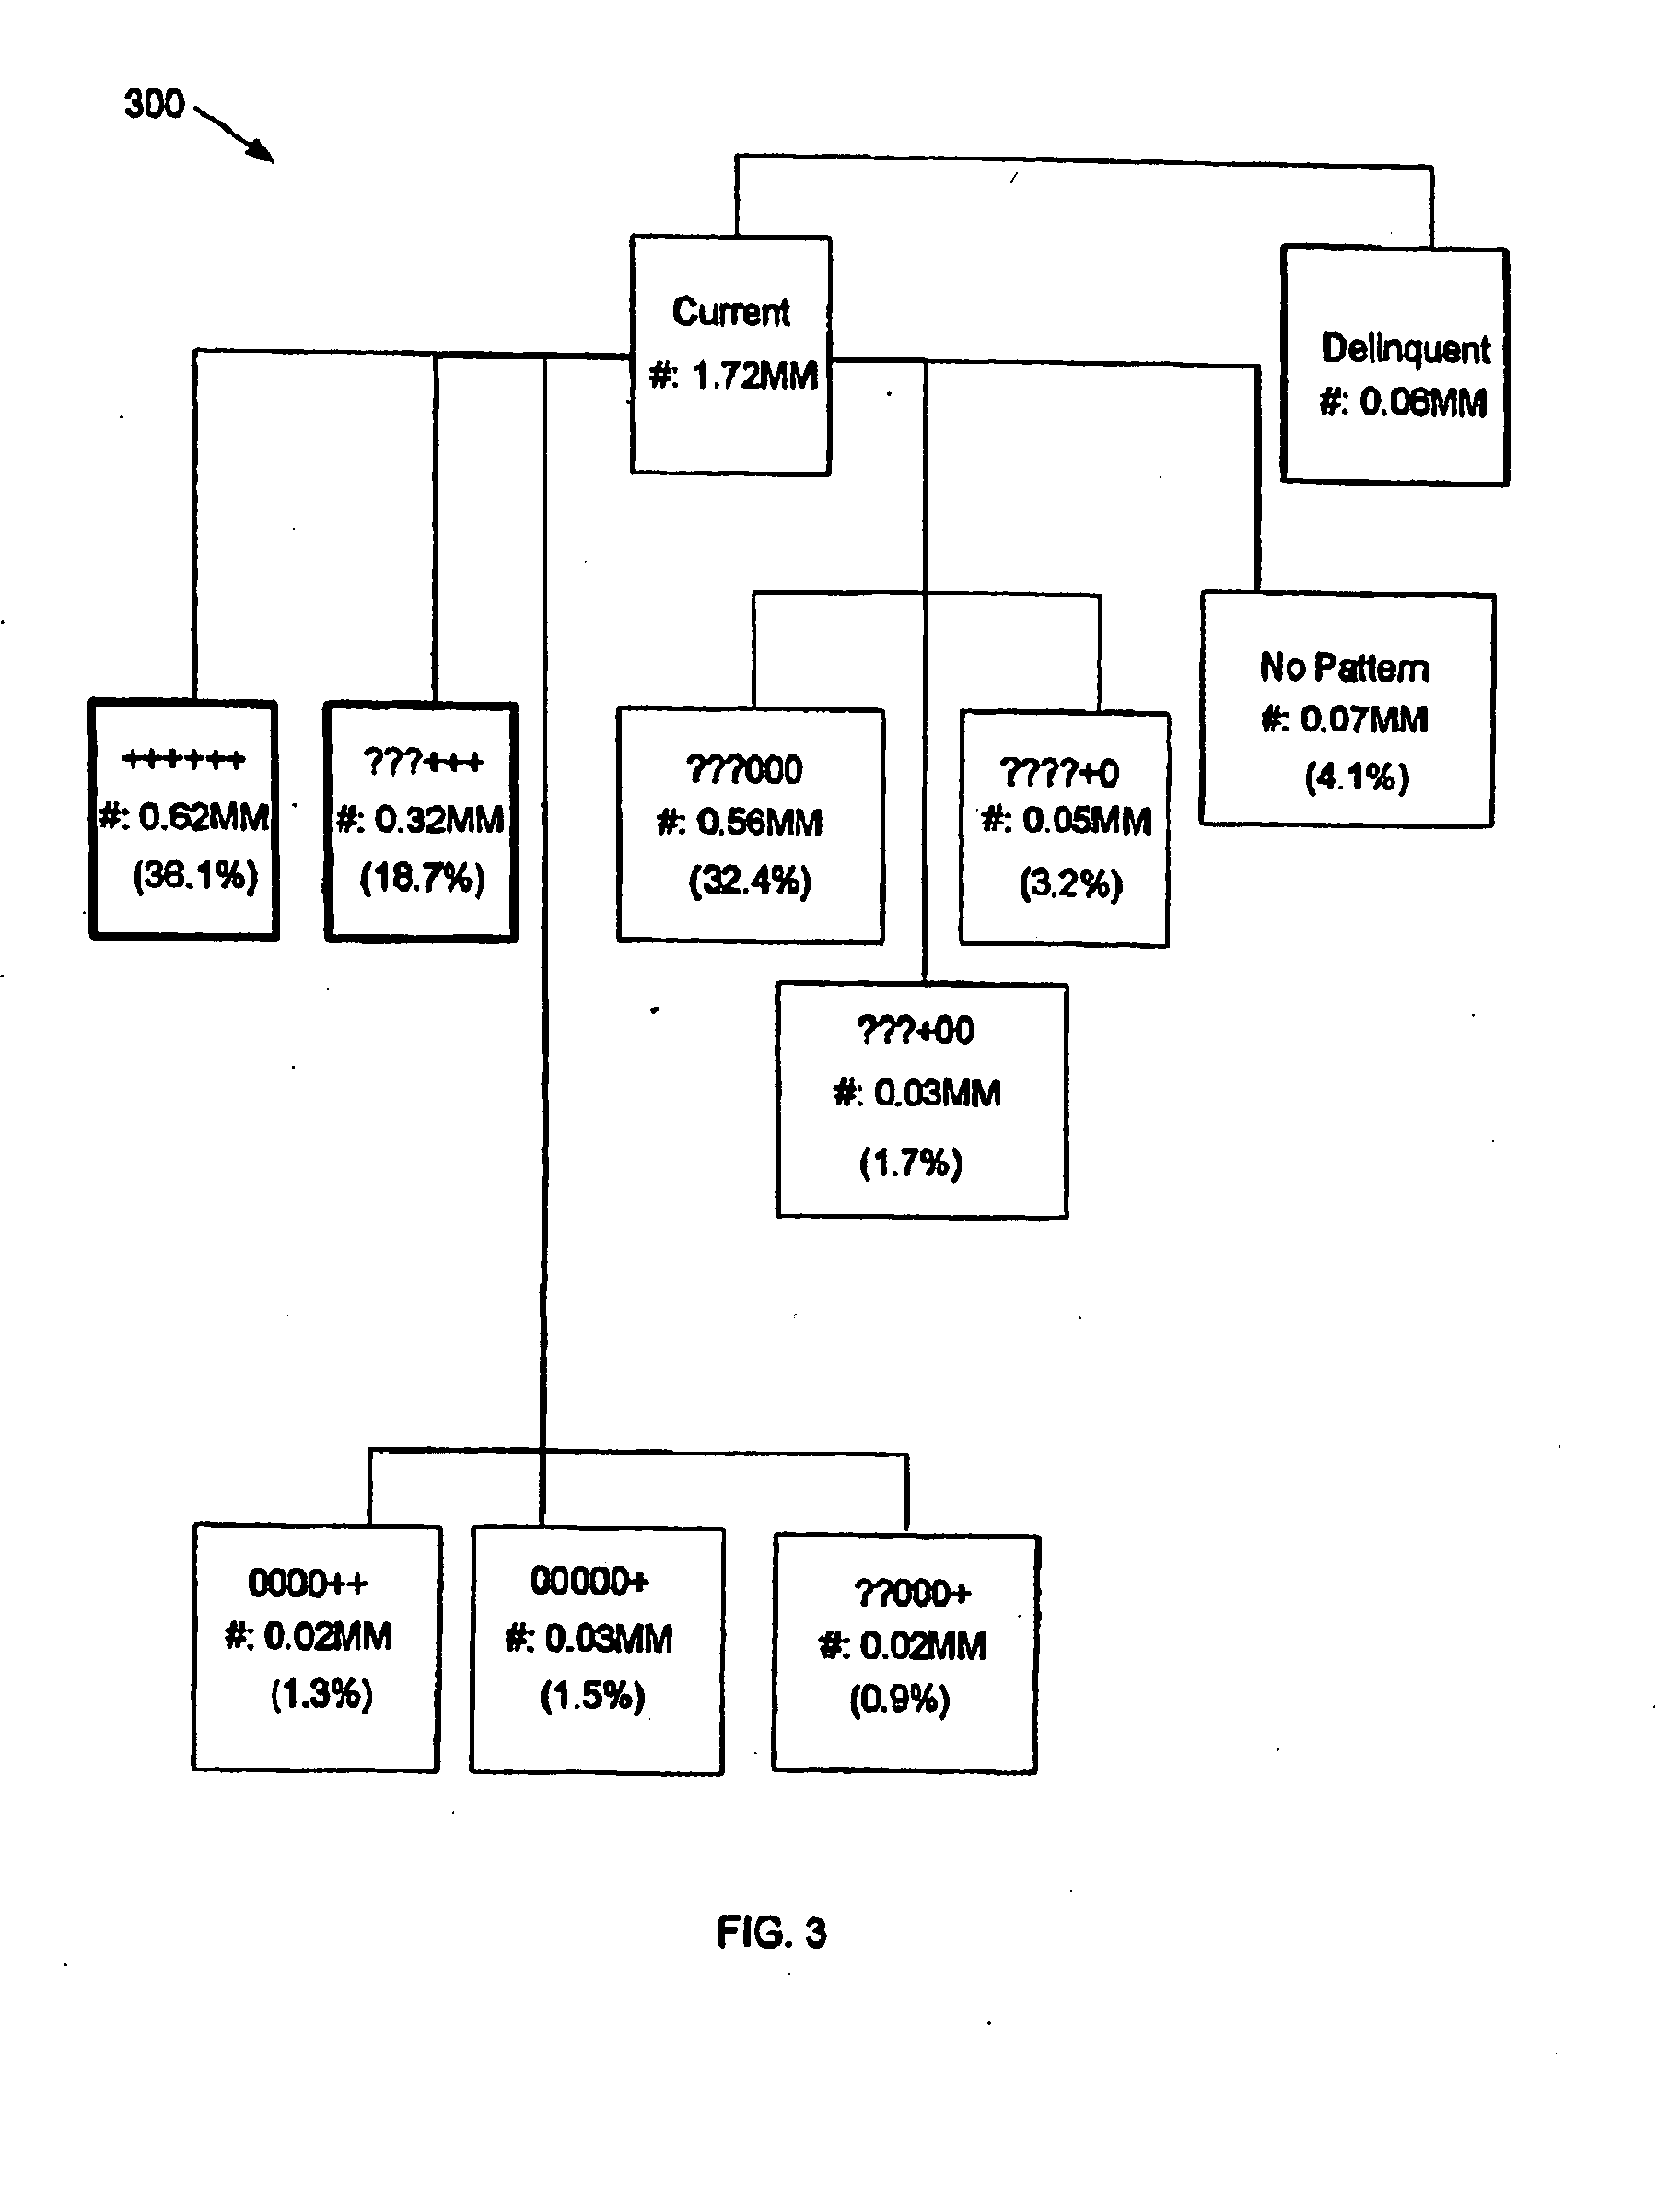 Method and apparatus for determining credit characteristics of a consumer